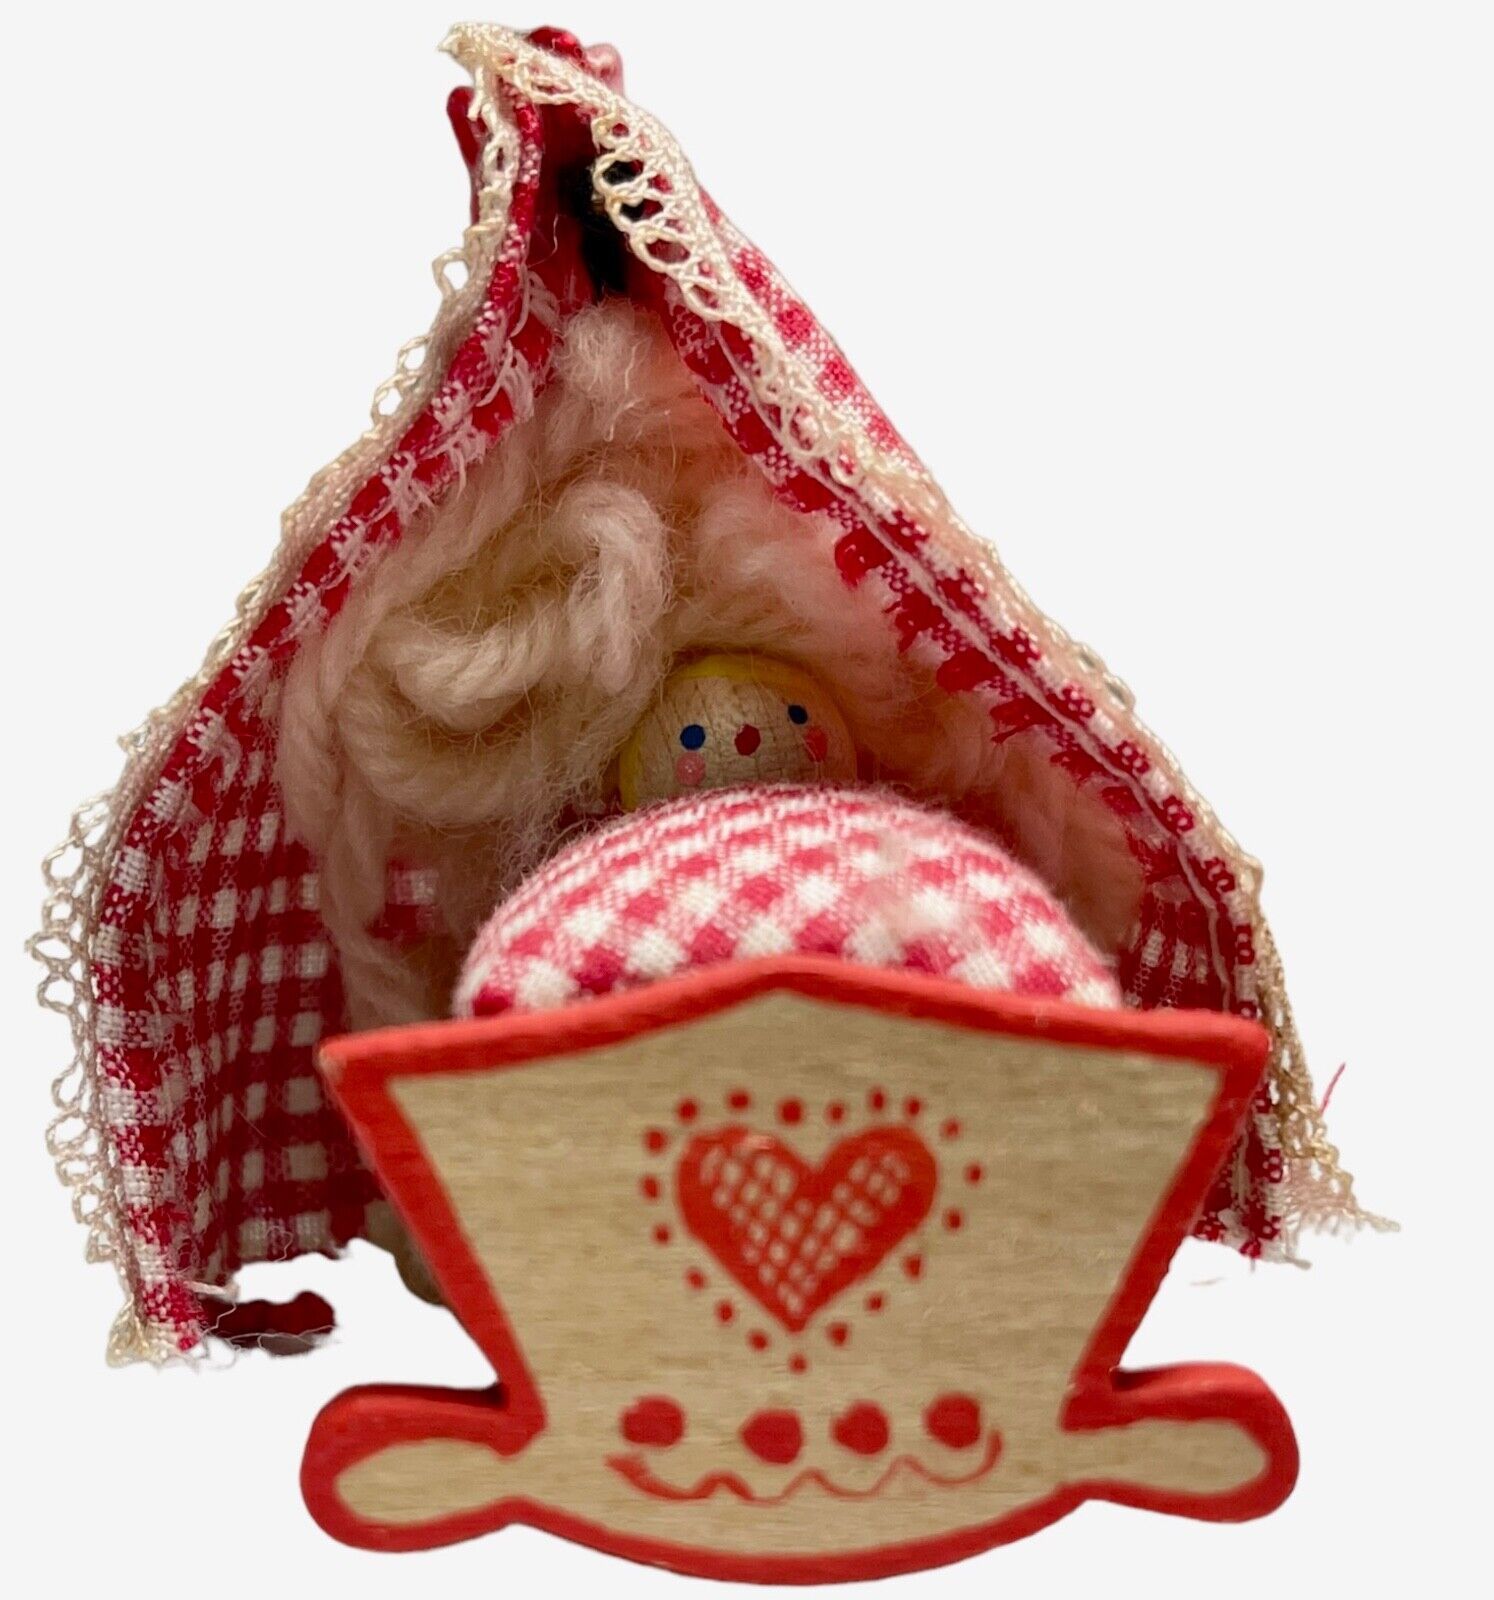 Primary image for Kathe Wohlfahrt Christmas Ornaments Baby in Cradle Red Checkered Heart Germany